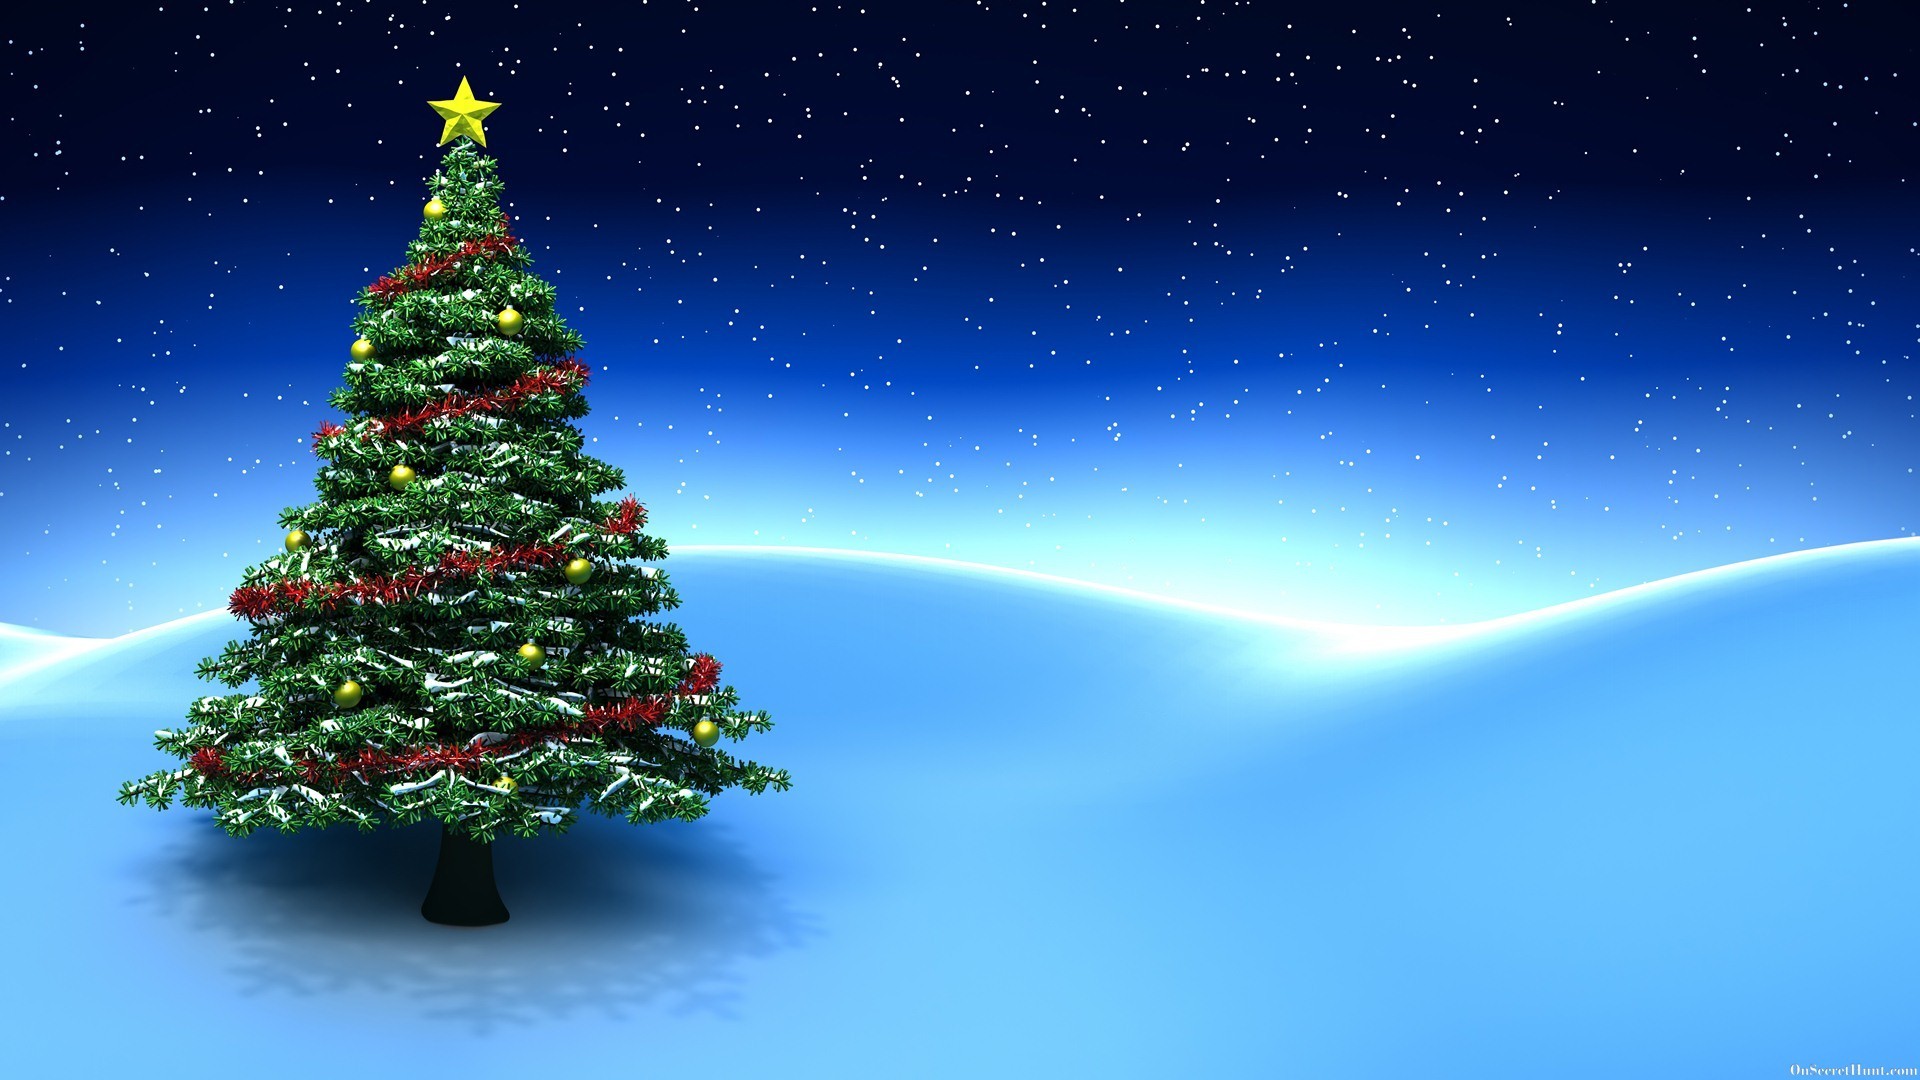 1920x1080 Christmas Tree Background Images – The evergreen Christmas ...